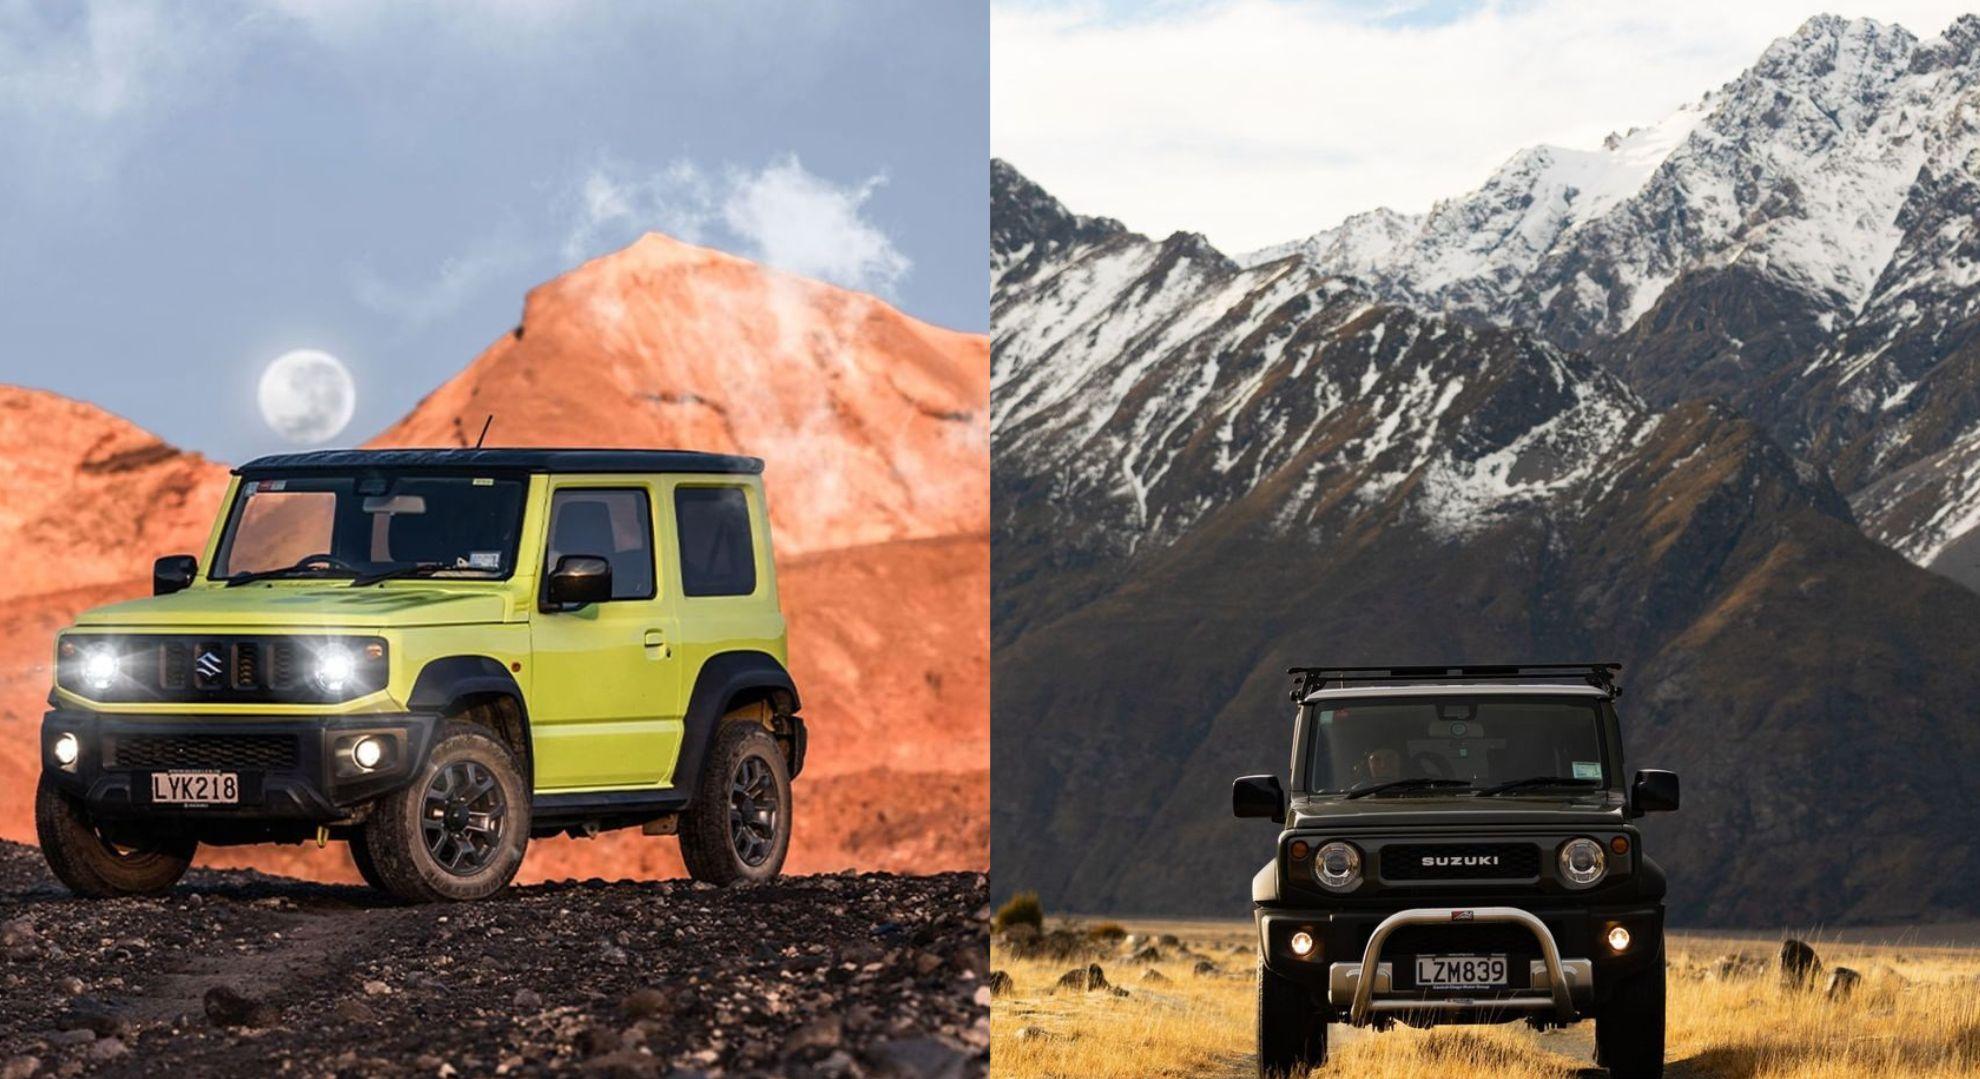 The Maruti Suzuki Jimny Is An Exciting New Off Roading Vehicle